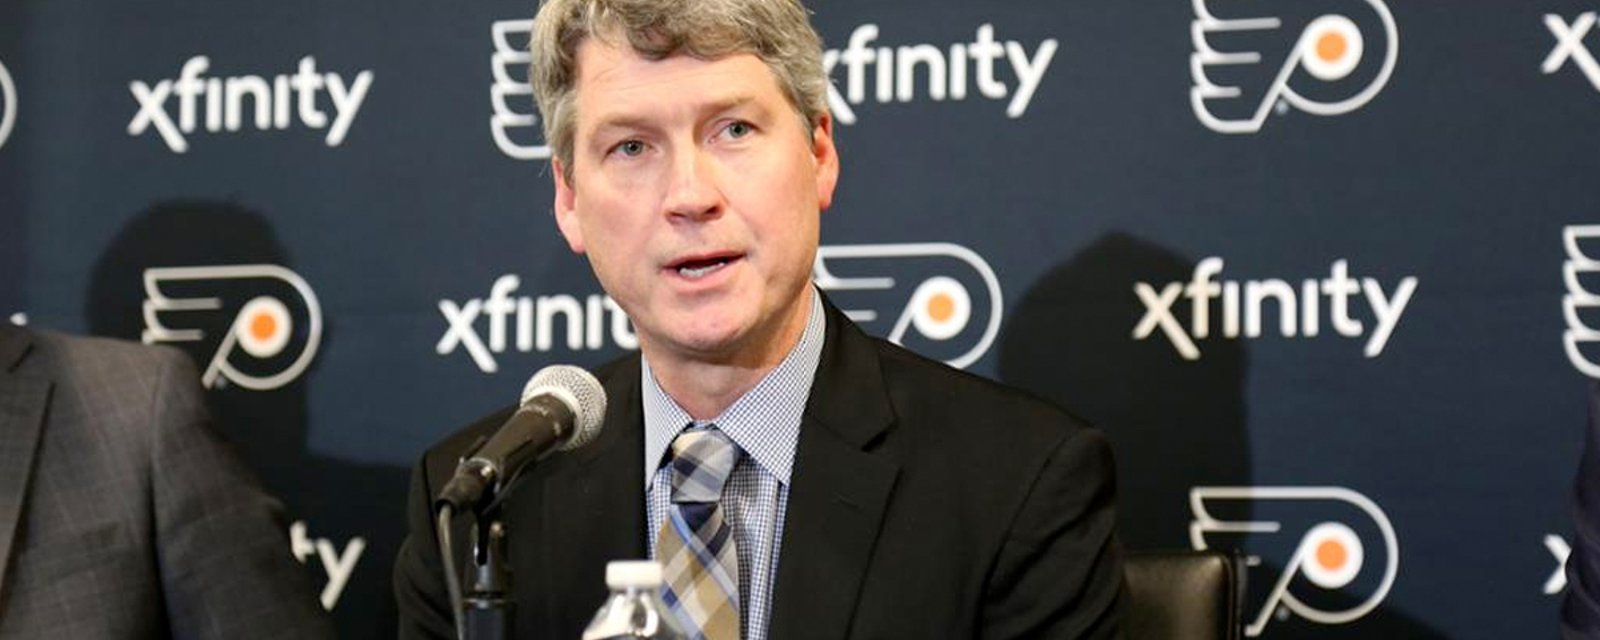 Rumor: Two former Jack Adams Award winning coaches linked to Flyers coaching position